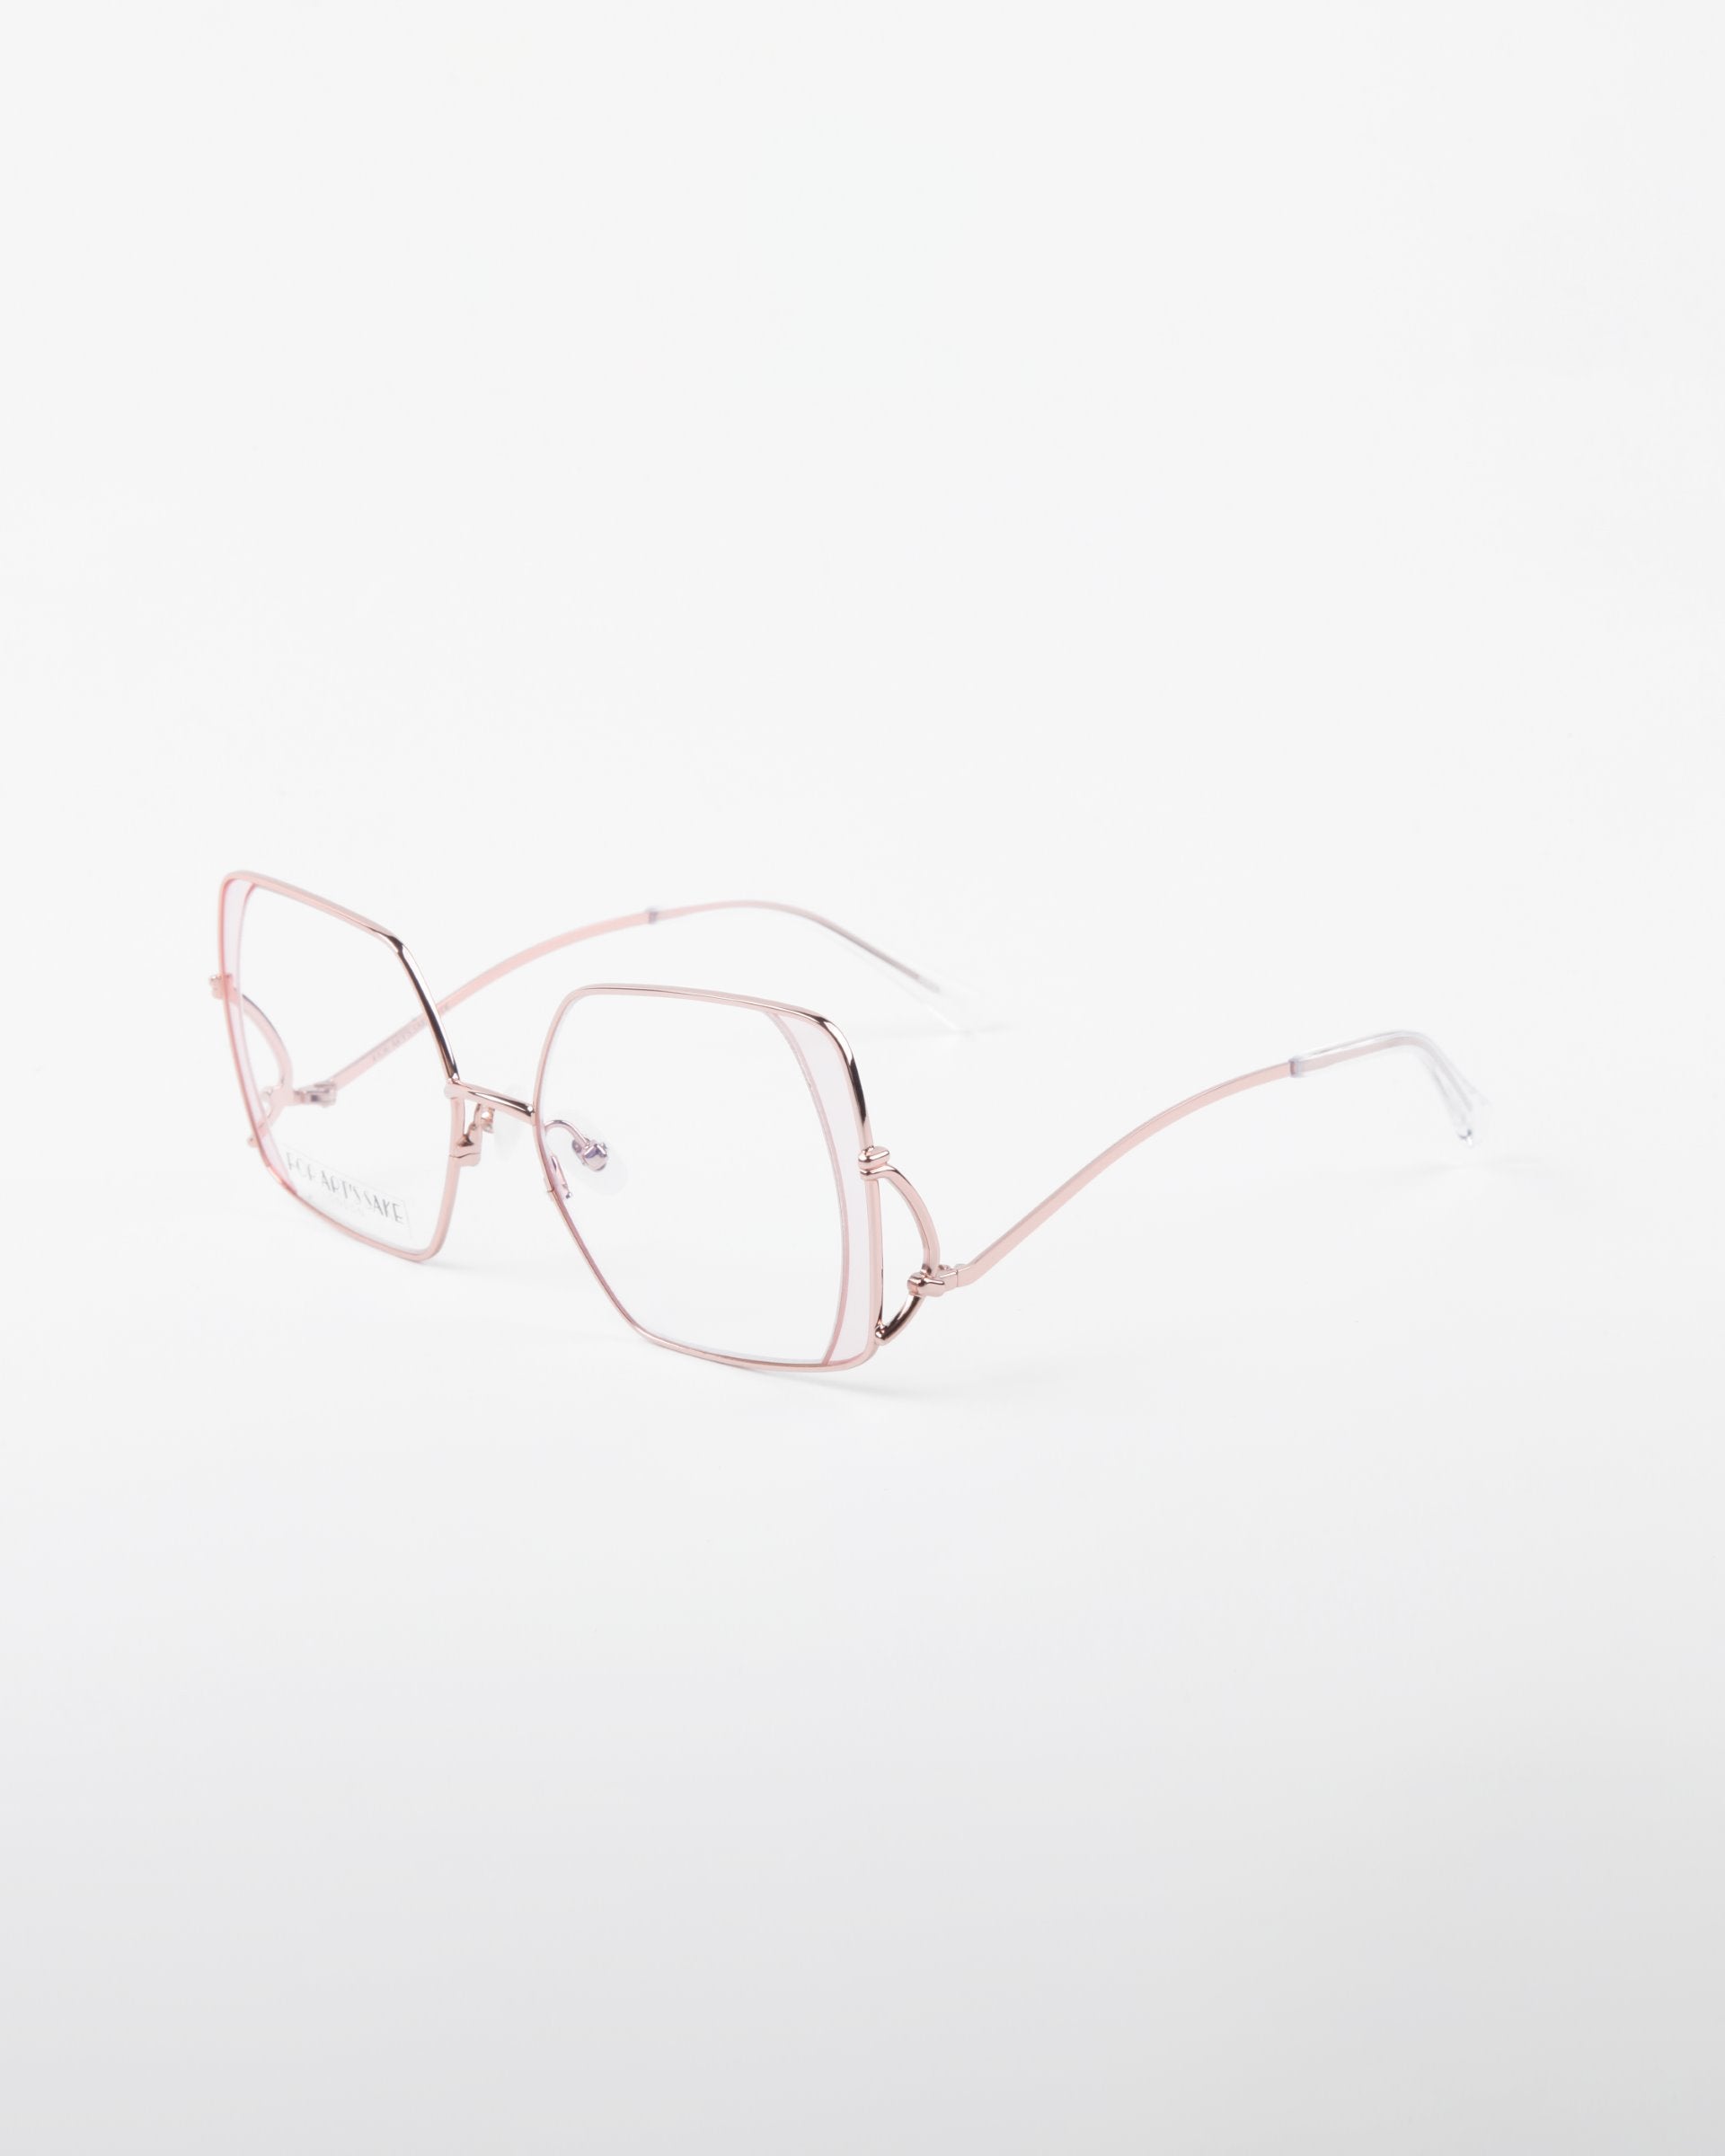 A pair of stainless steel eyeglasses with thin, pale pink metal frames. The lenses are hexagonal in shape, and the temples are also a matching pink with transparent ends. Perfect for prescription services or adding a blue light filter. The background is plain white. These eyeglasses are called &quot;Candy&quot; by For Art&#39;s Sake®.